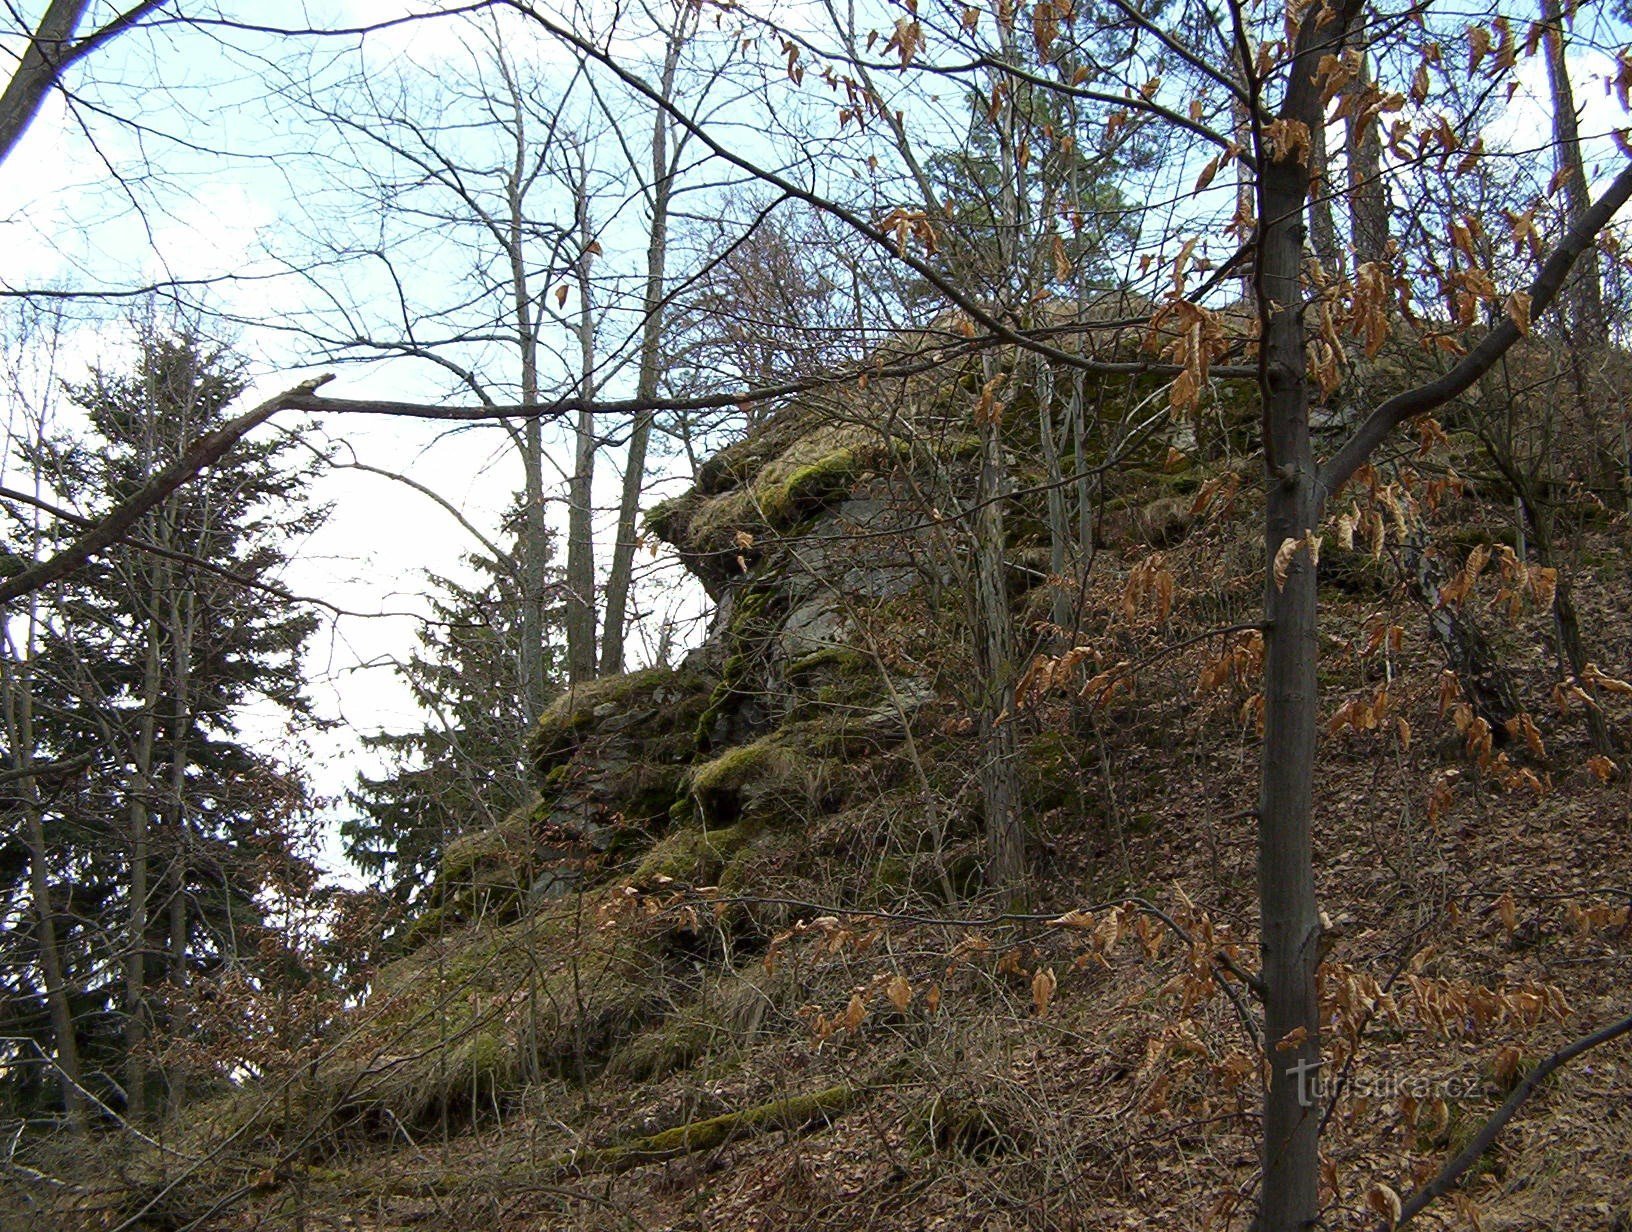 2. View of the remains of the Menagerie castle.